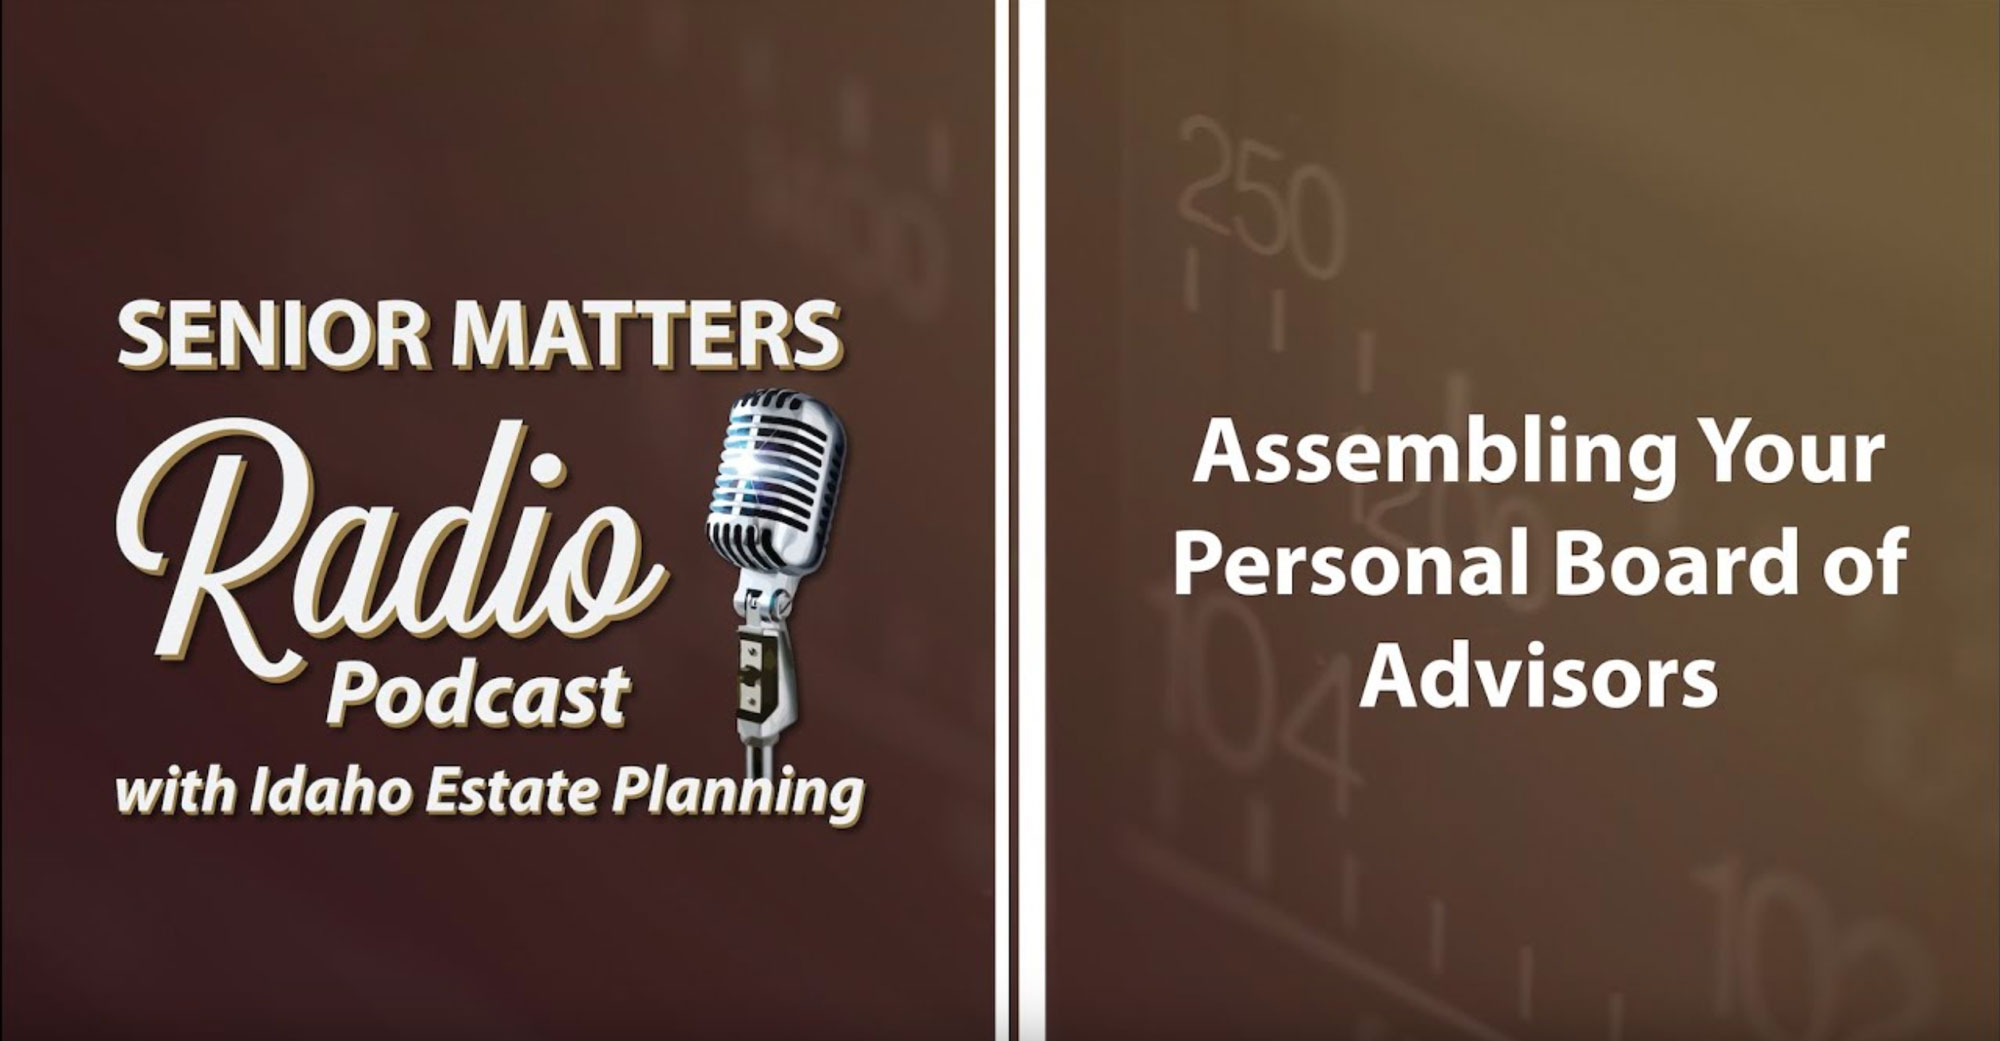 Assembling your Personal Board of Advisors